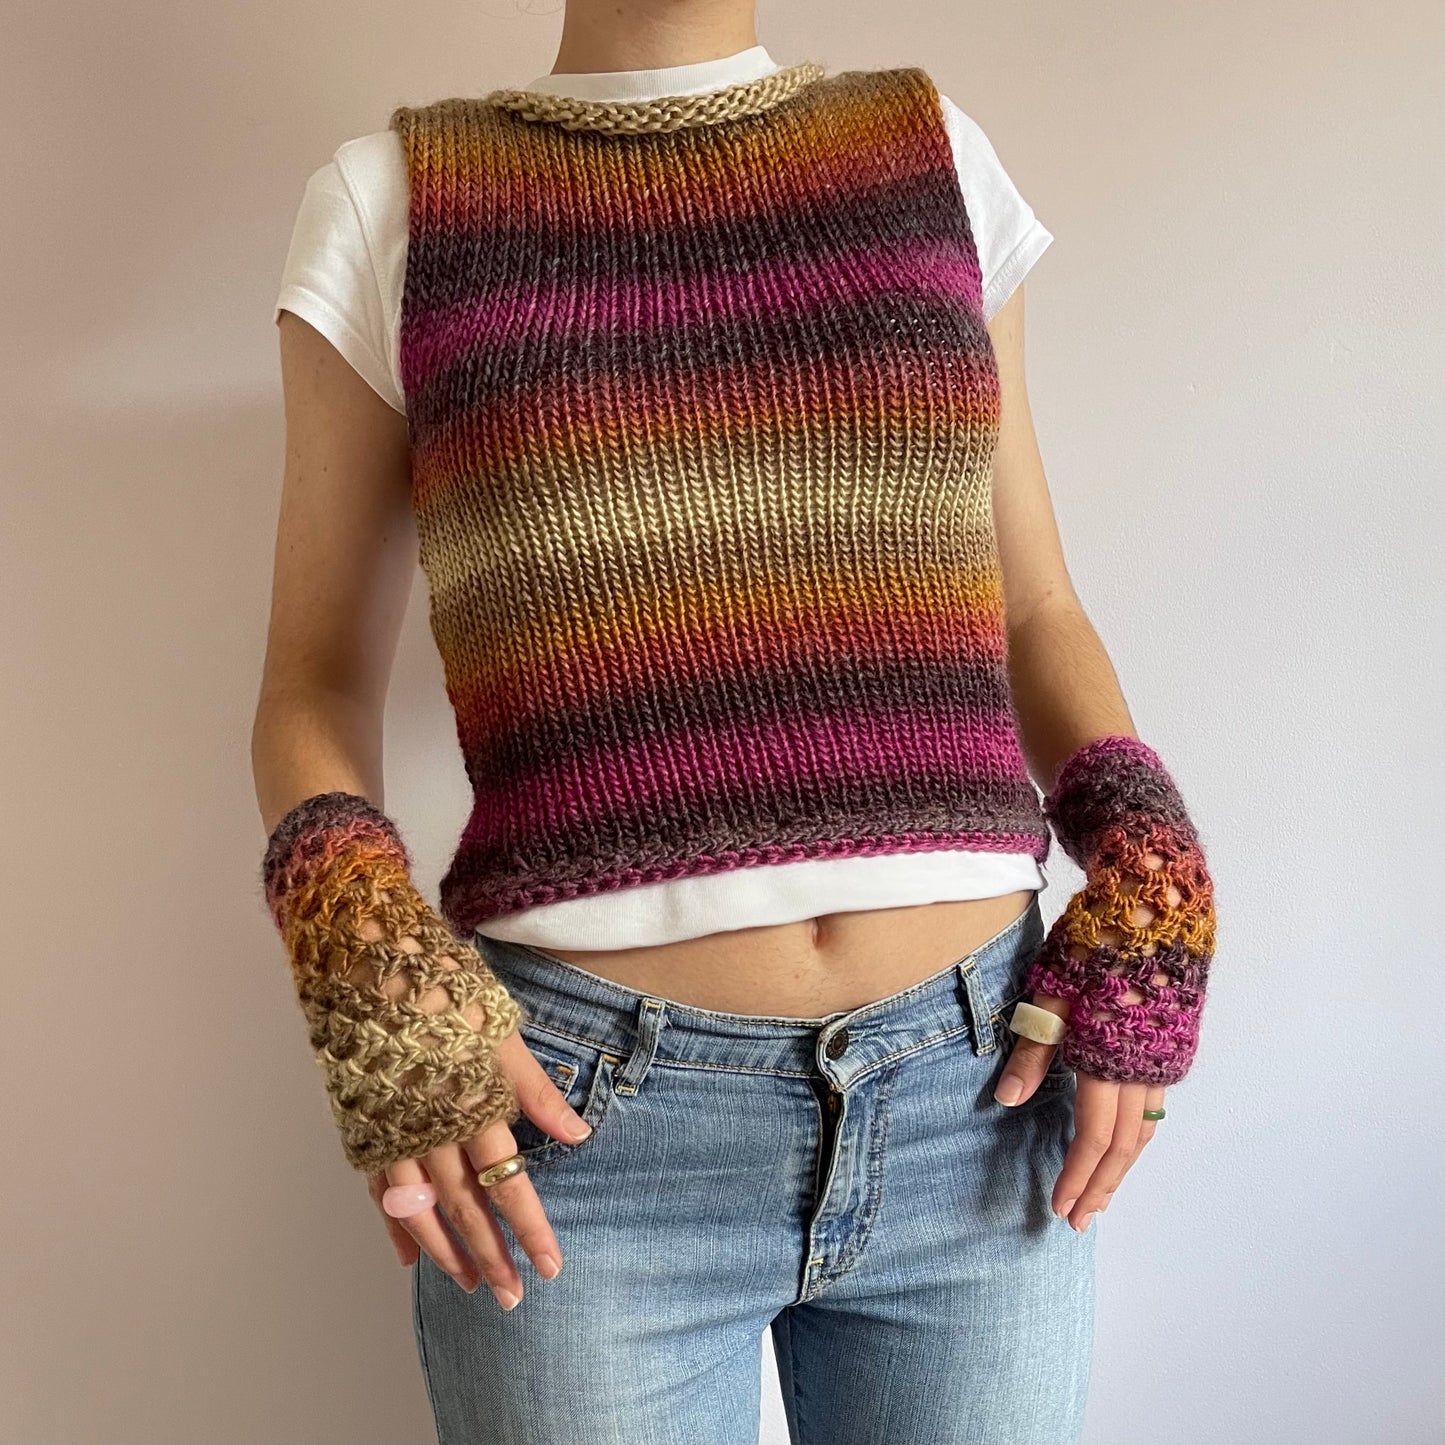 SET - Handmade sweater vest and matching gloves in Sunset Shades